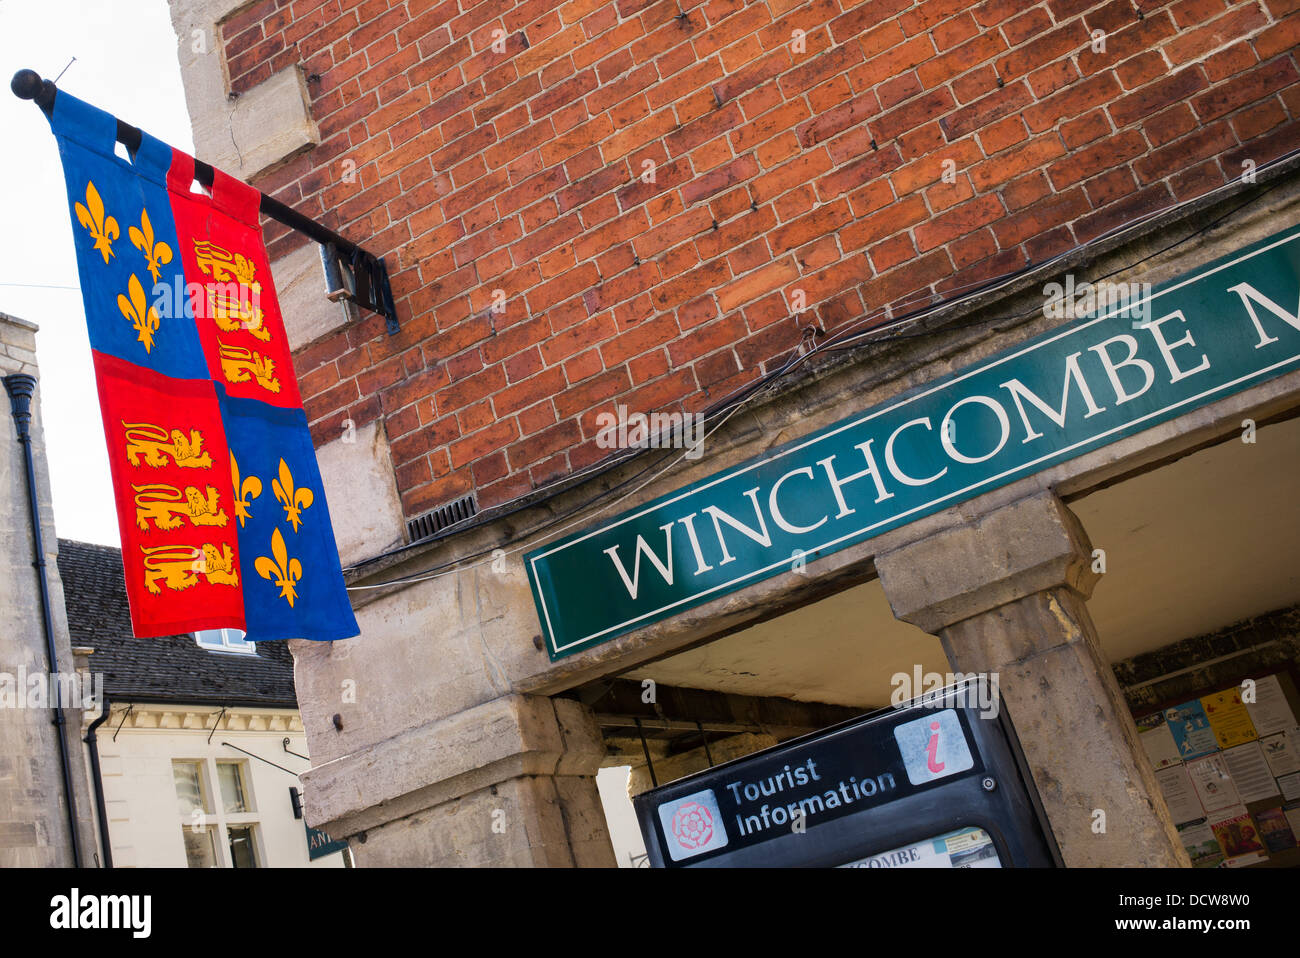 Winchcombe sign and Royal Arms heraldic banner. High Street. Gloucestershire, England Stock Photo